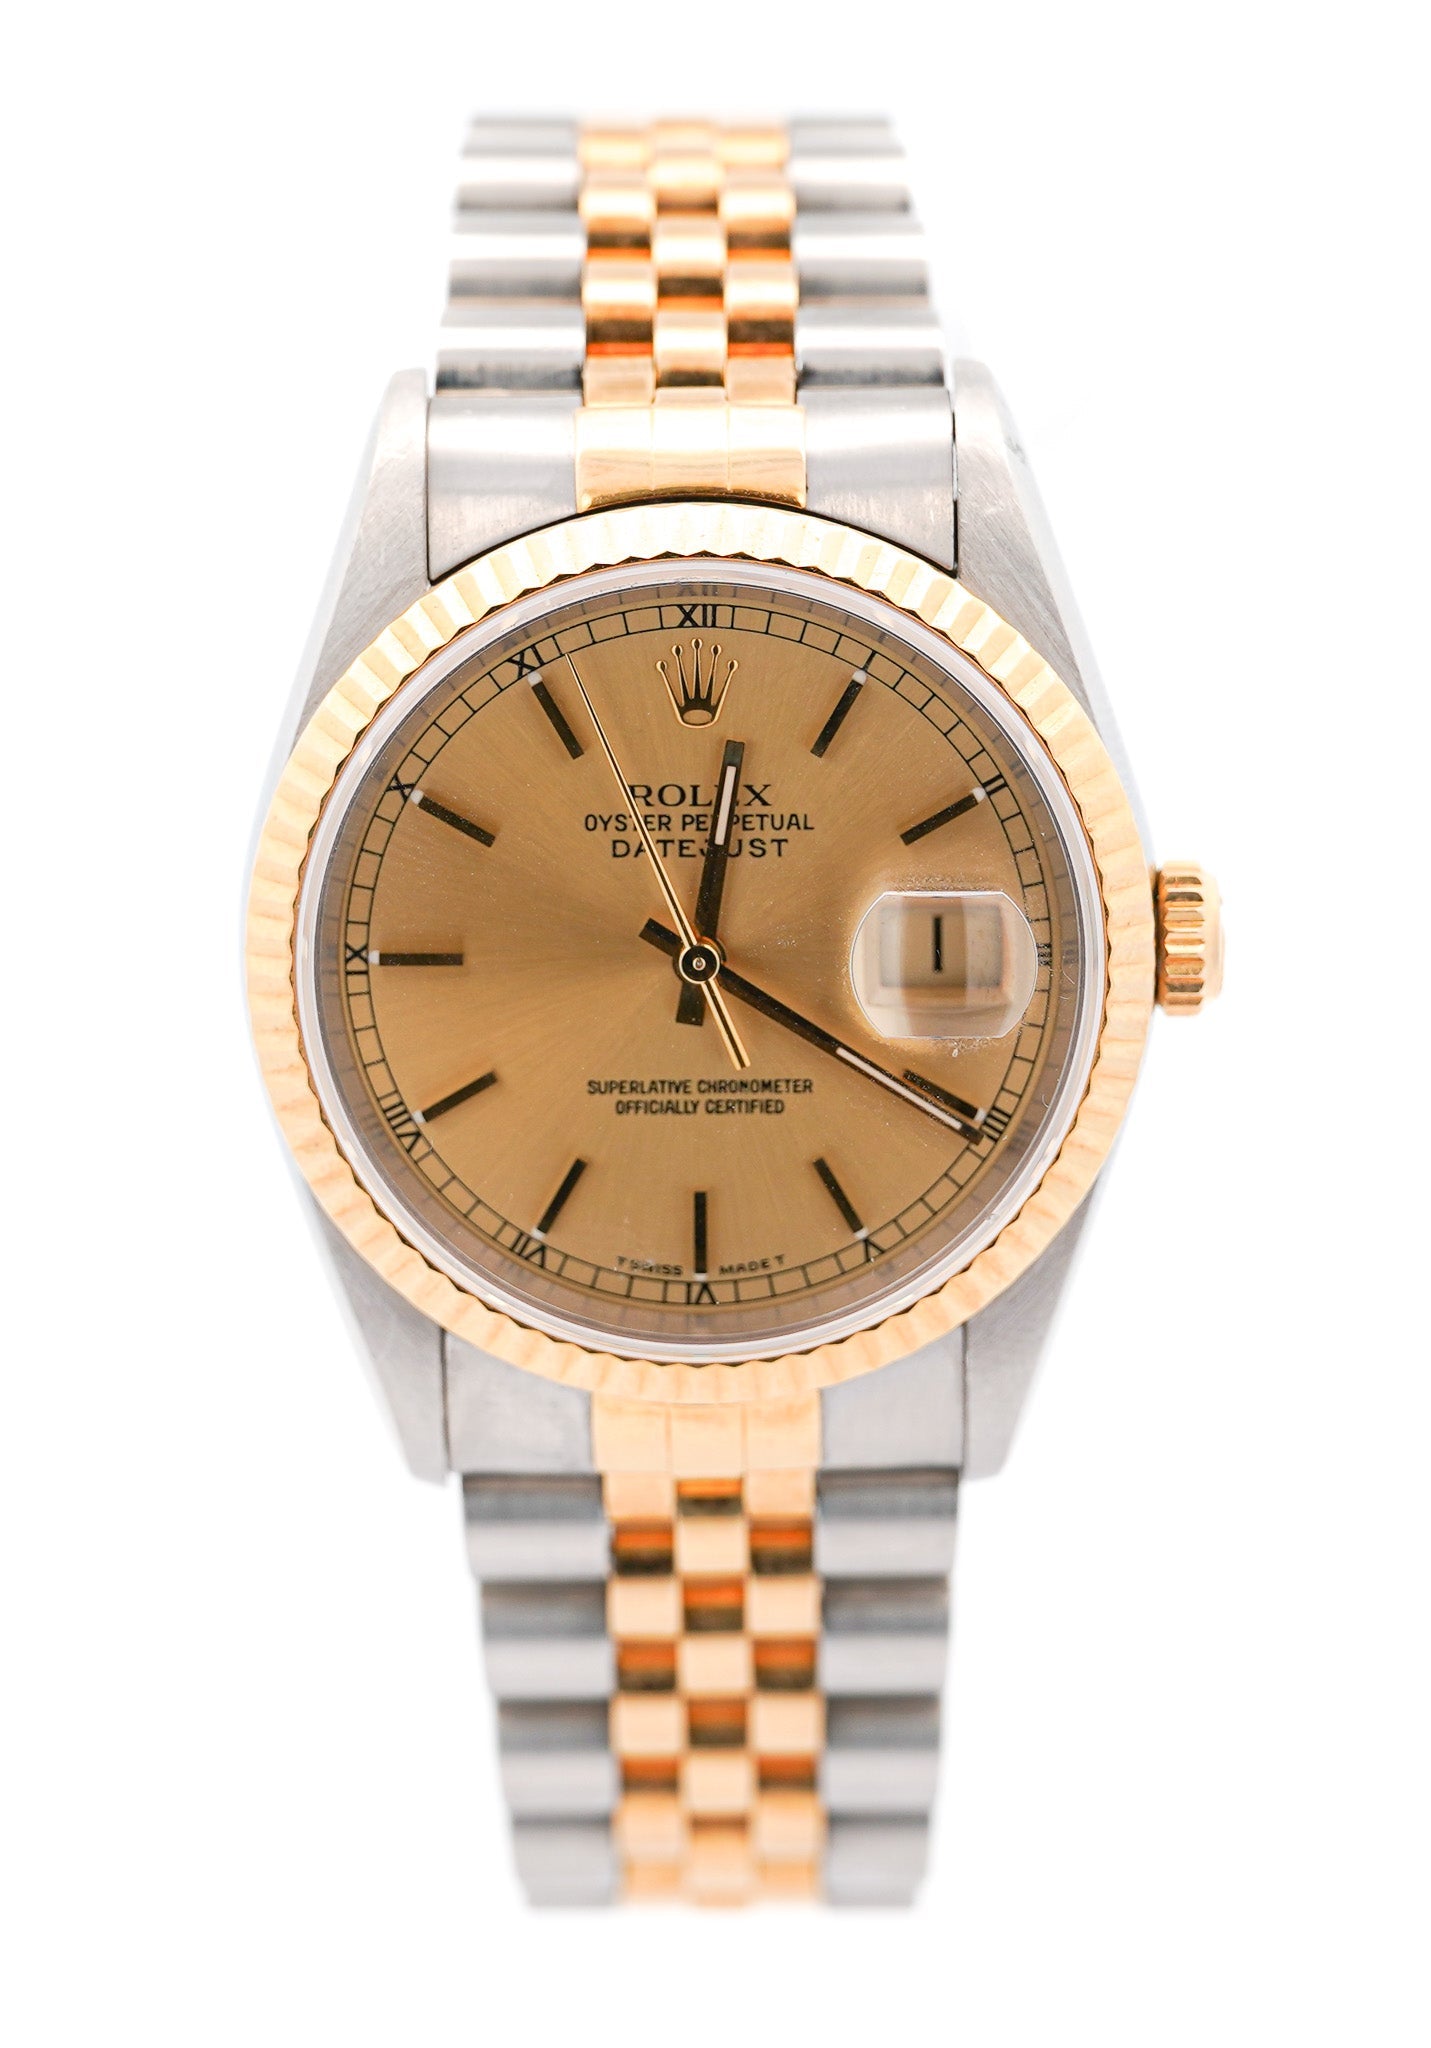 Vintage-Rolex-DateJust-36mm-Two-Tone-On-Jubilee-Date-1995-Watch-Watches.jpg